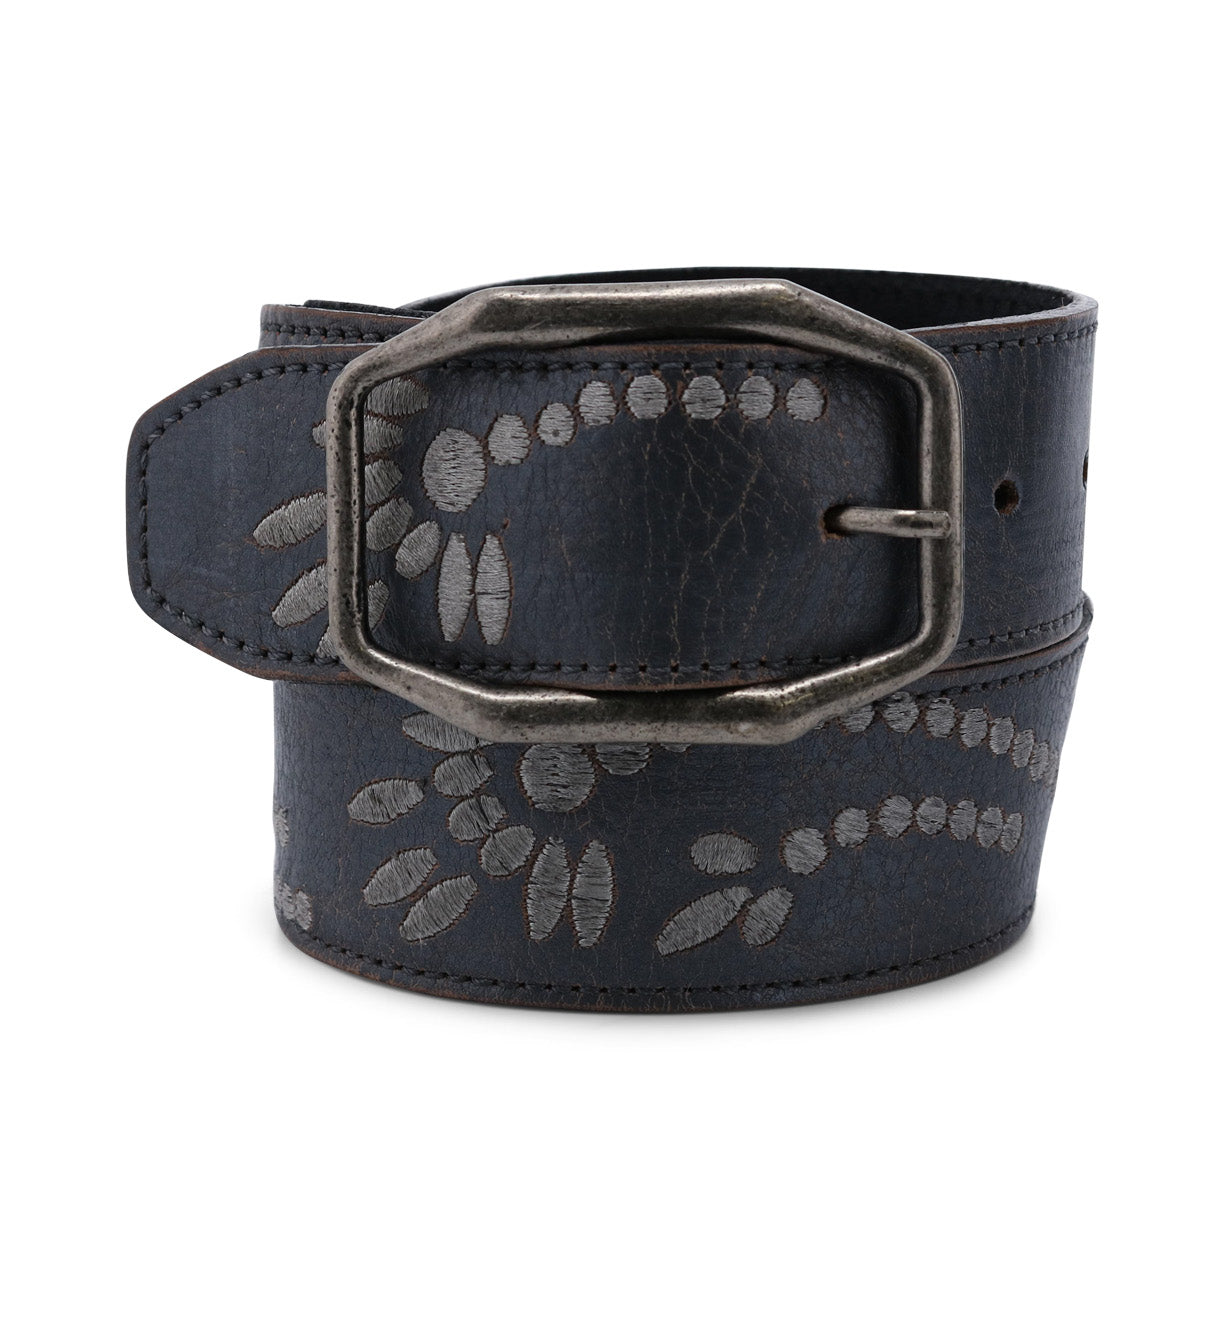 A black leather belt with a rectangular metal buckle and decorative stitching featuring leaf patterns, perfect as part of Bed|Stü's 'Shop the Look' Bundle!